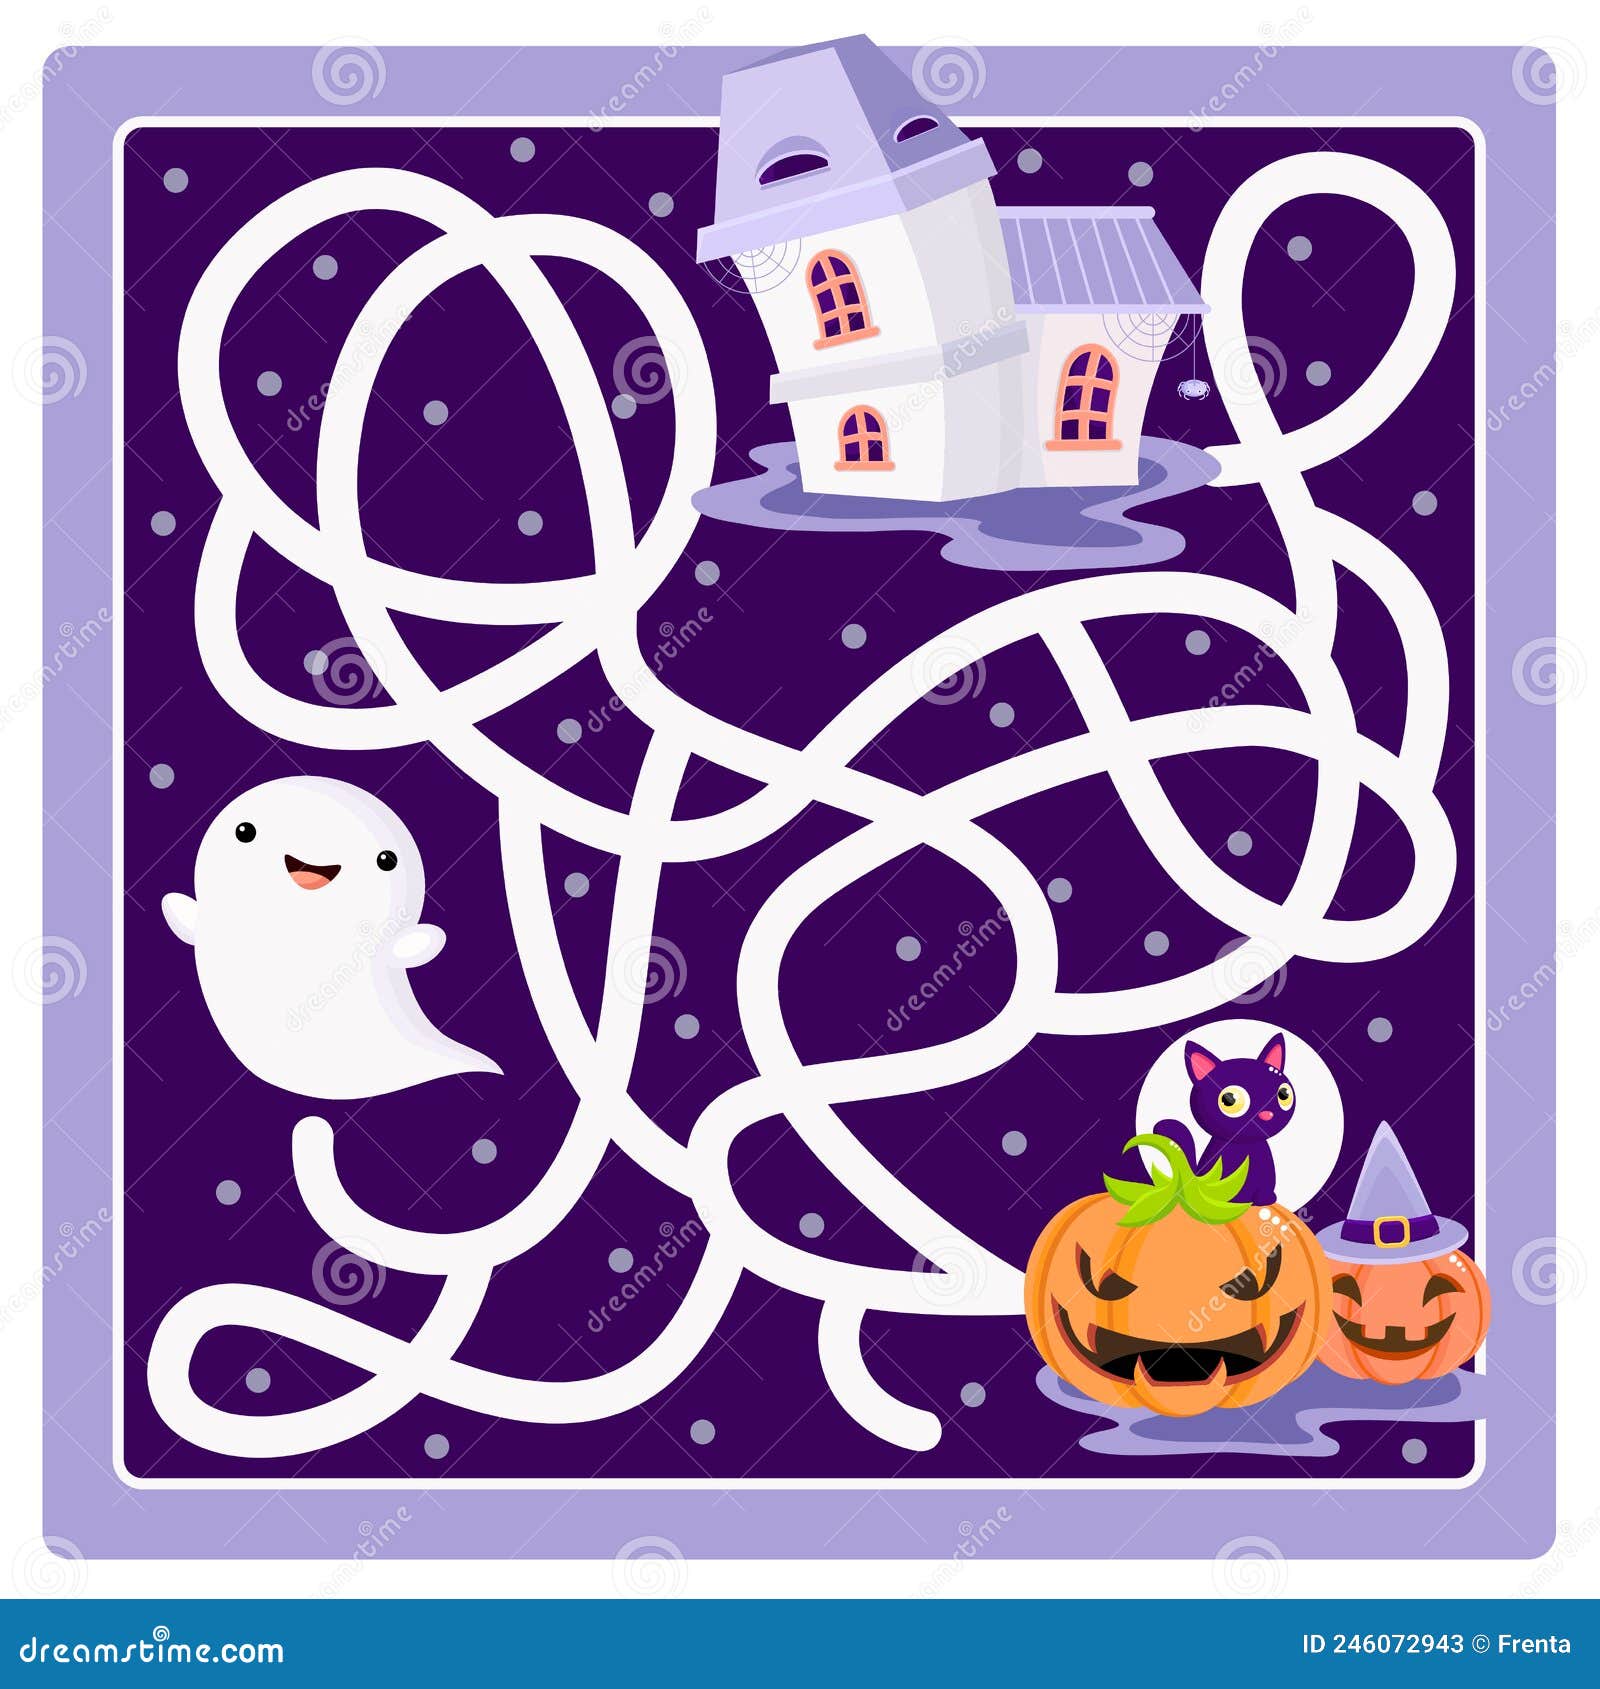 Help the Little Ghost Find the Way To Haunted House. Maze Game for Kids  Stock Vector - Illustration of learning, character: 246072943